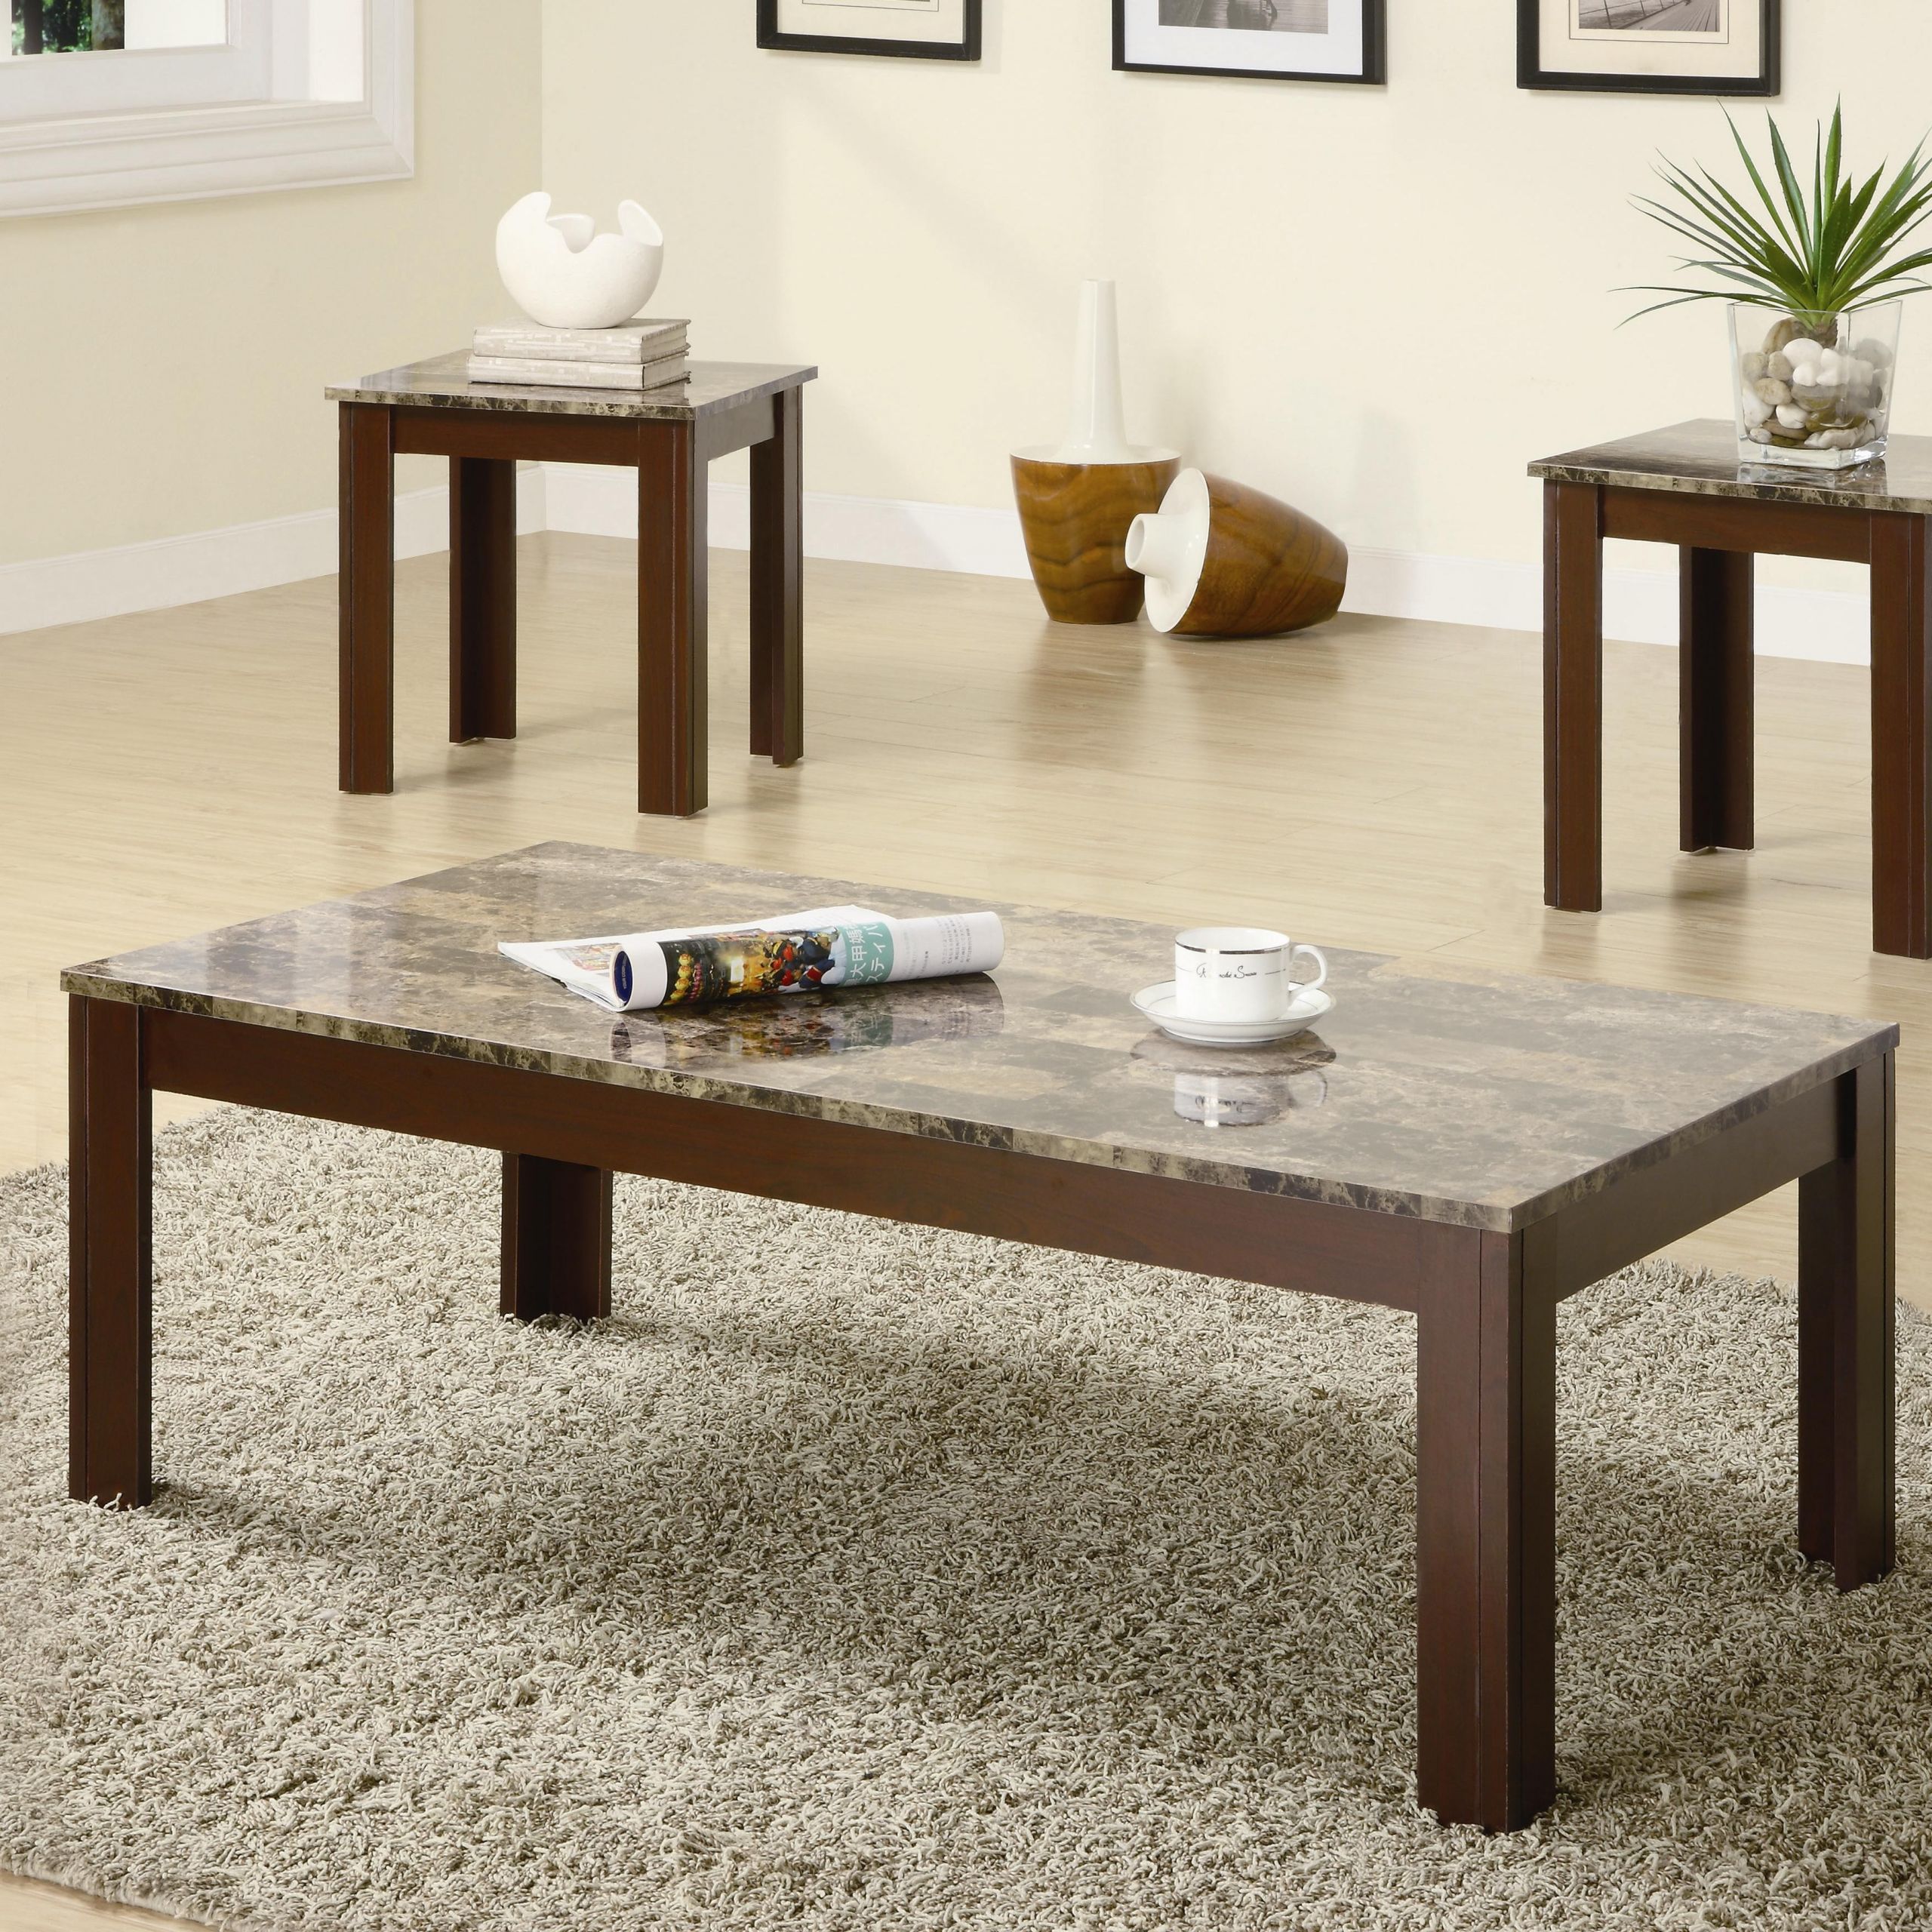 Living Room Coffee Table Sets
 3 Piece Occasional Table Sets Contemporary Cocktail and